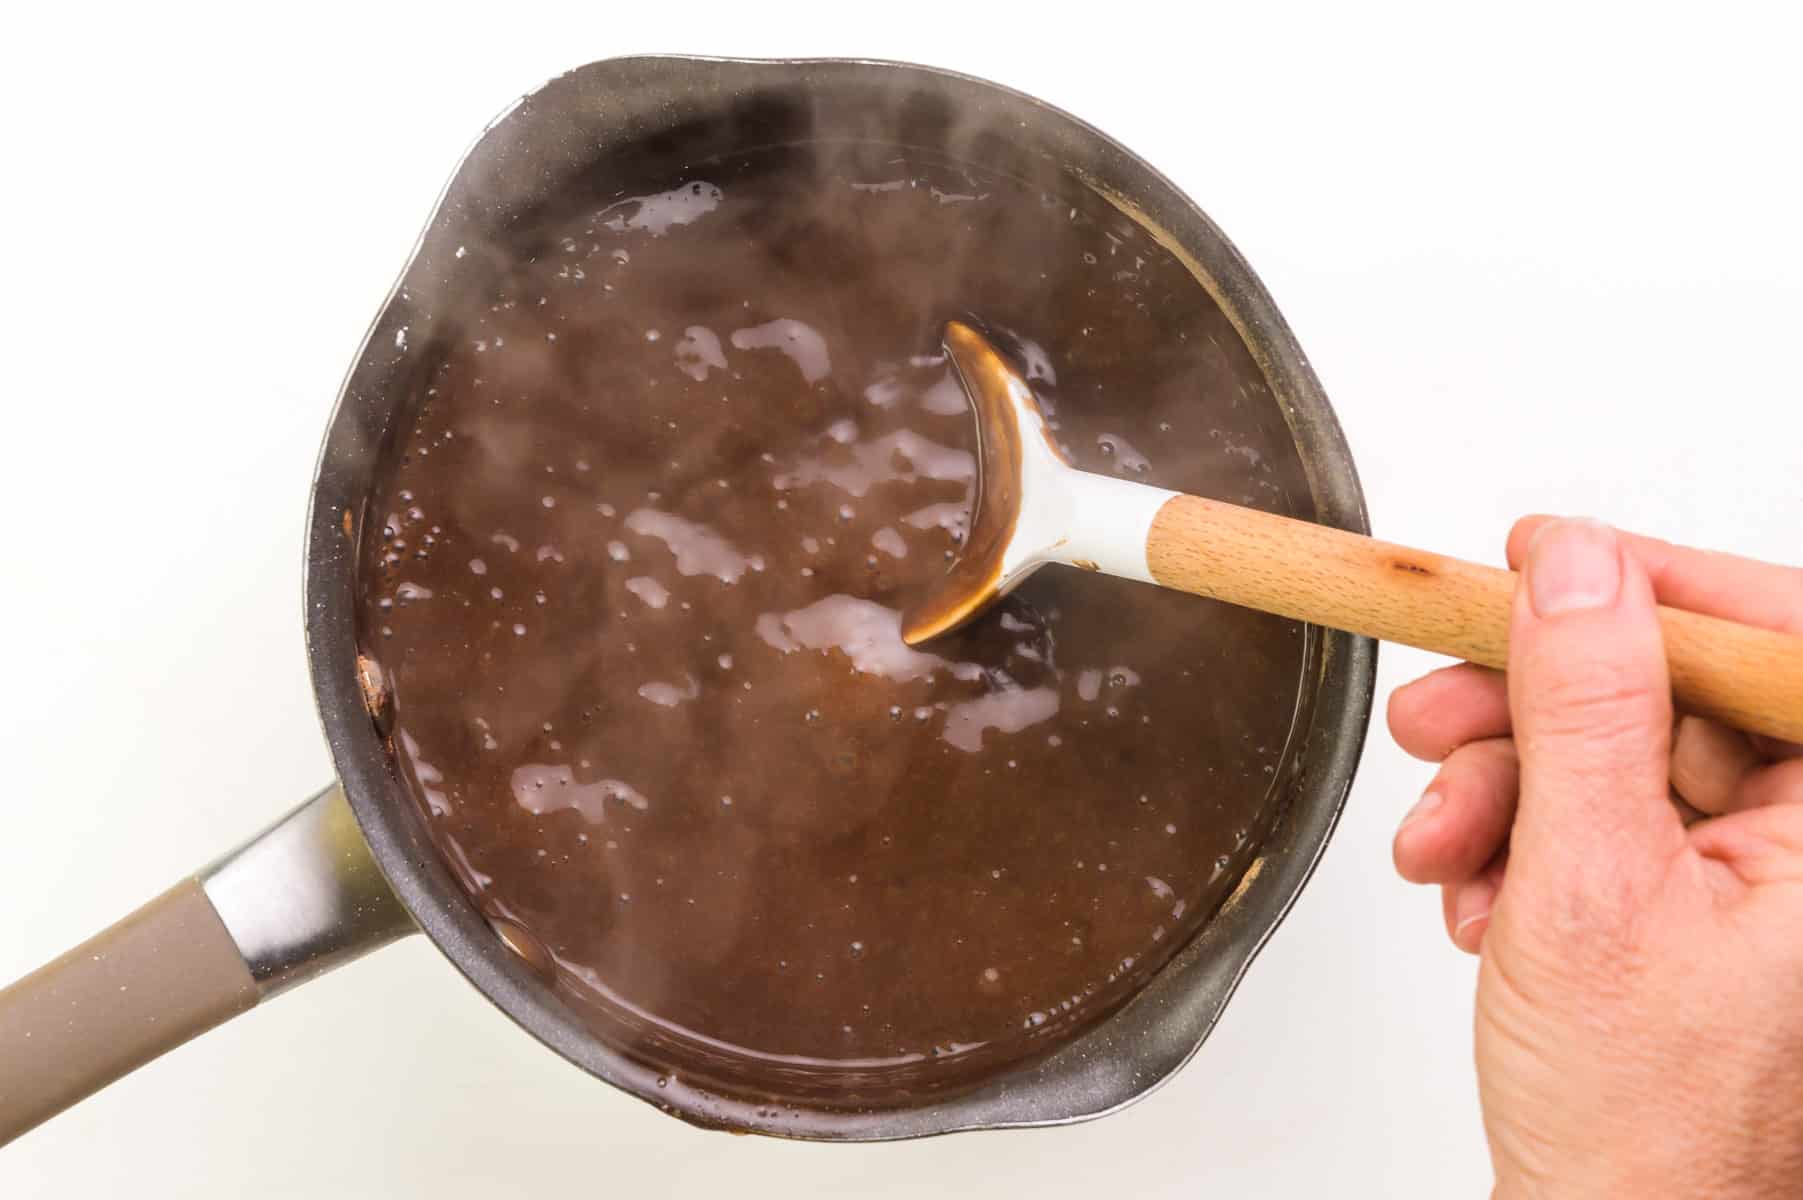 Dairy-free pudding is being stirred in a saucepan.